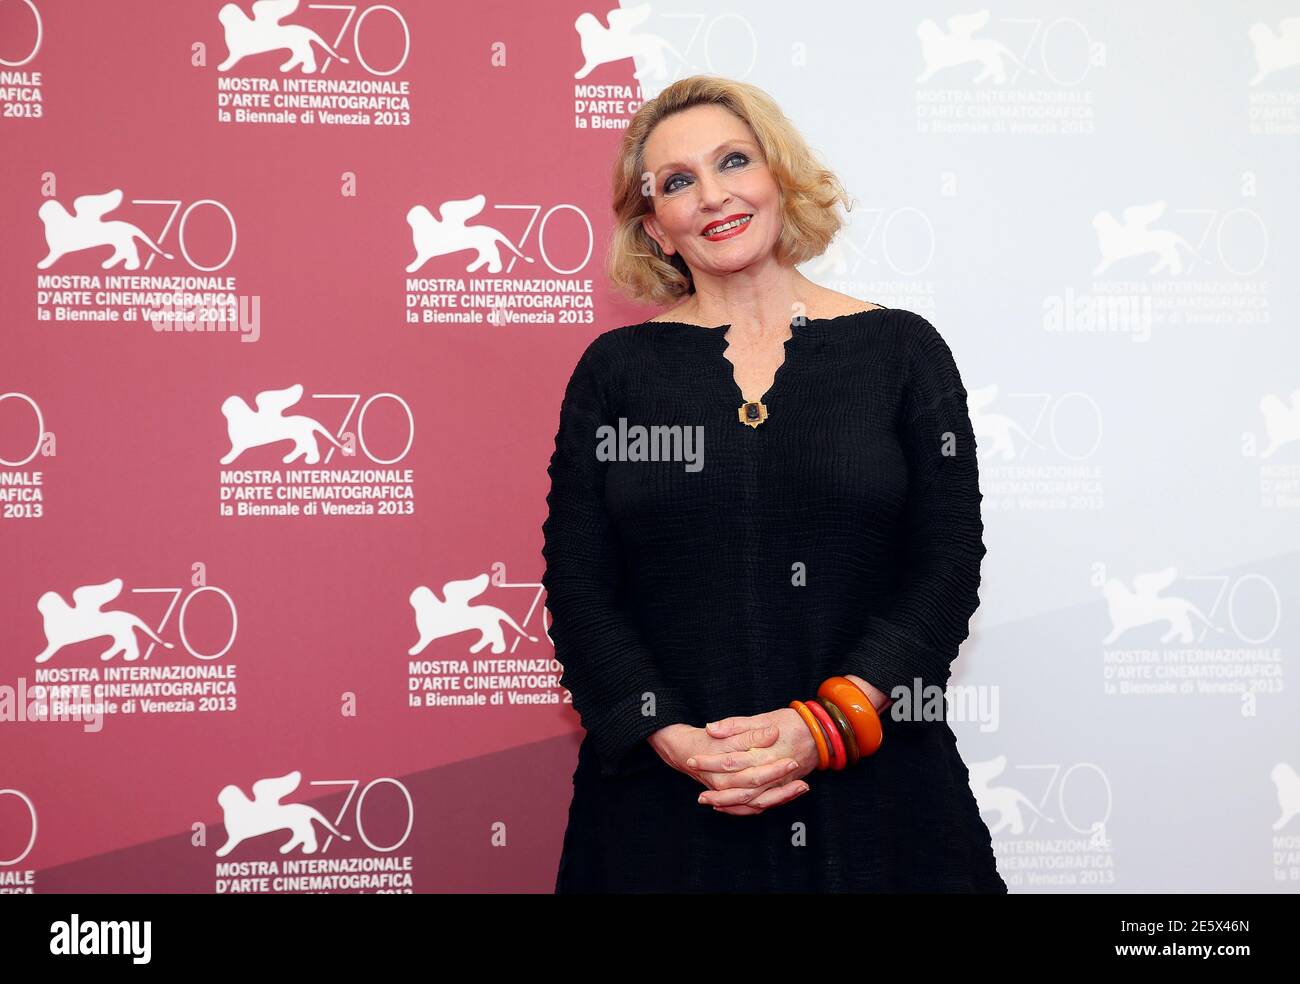 Australian writer Robyn Davidson, author the novel "Tracks", poses during a photocall during the 70th Venice Film Festival in Venice August 29, 2013. The John Curran movie "Tracks" debuts at the